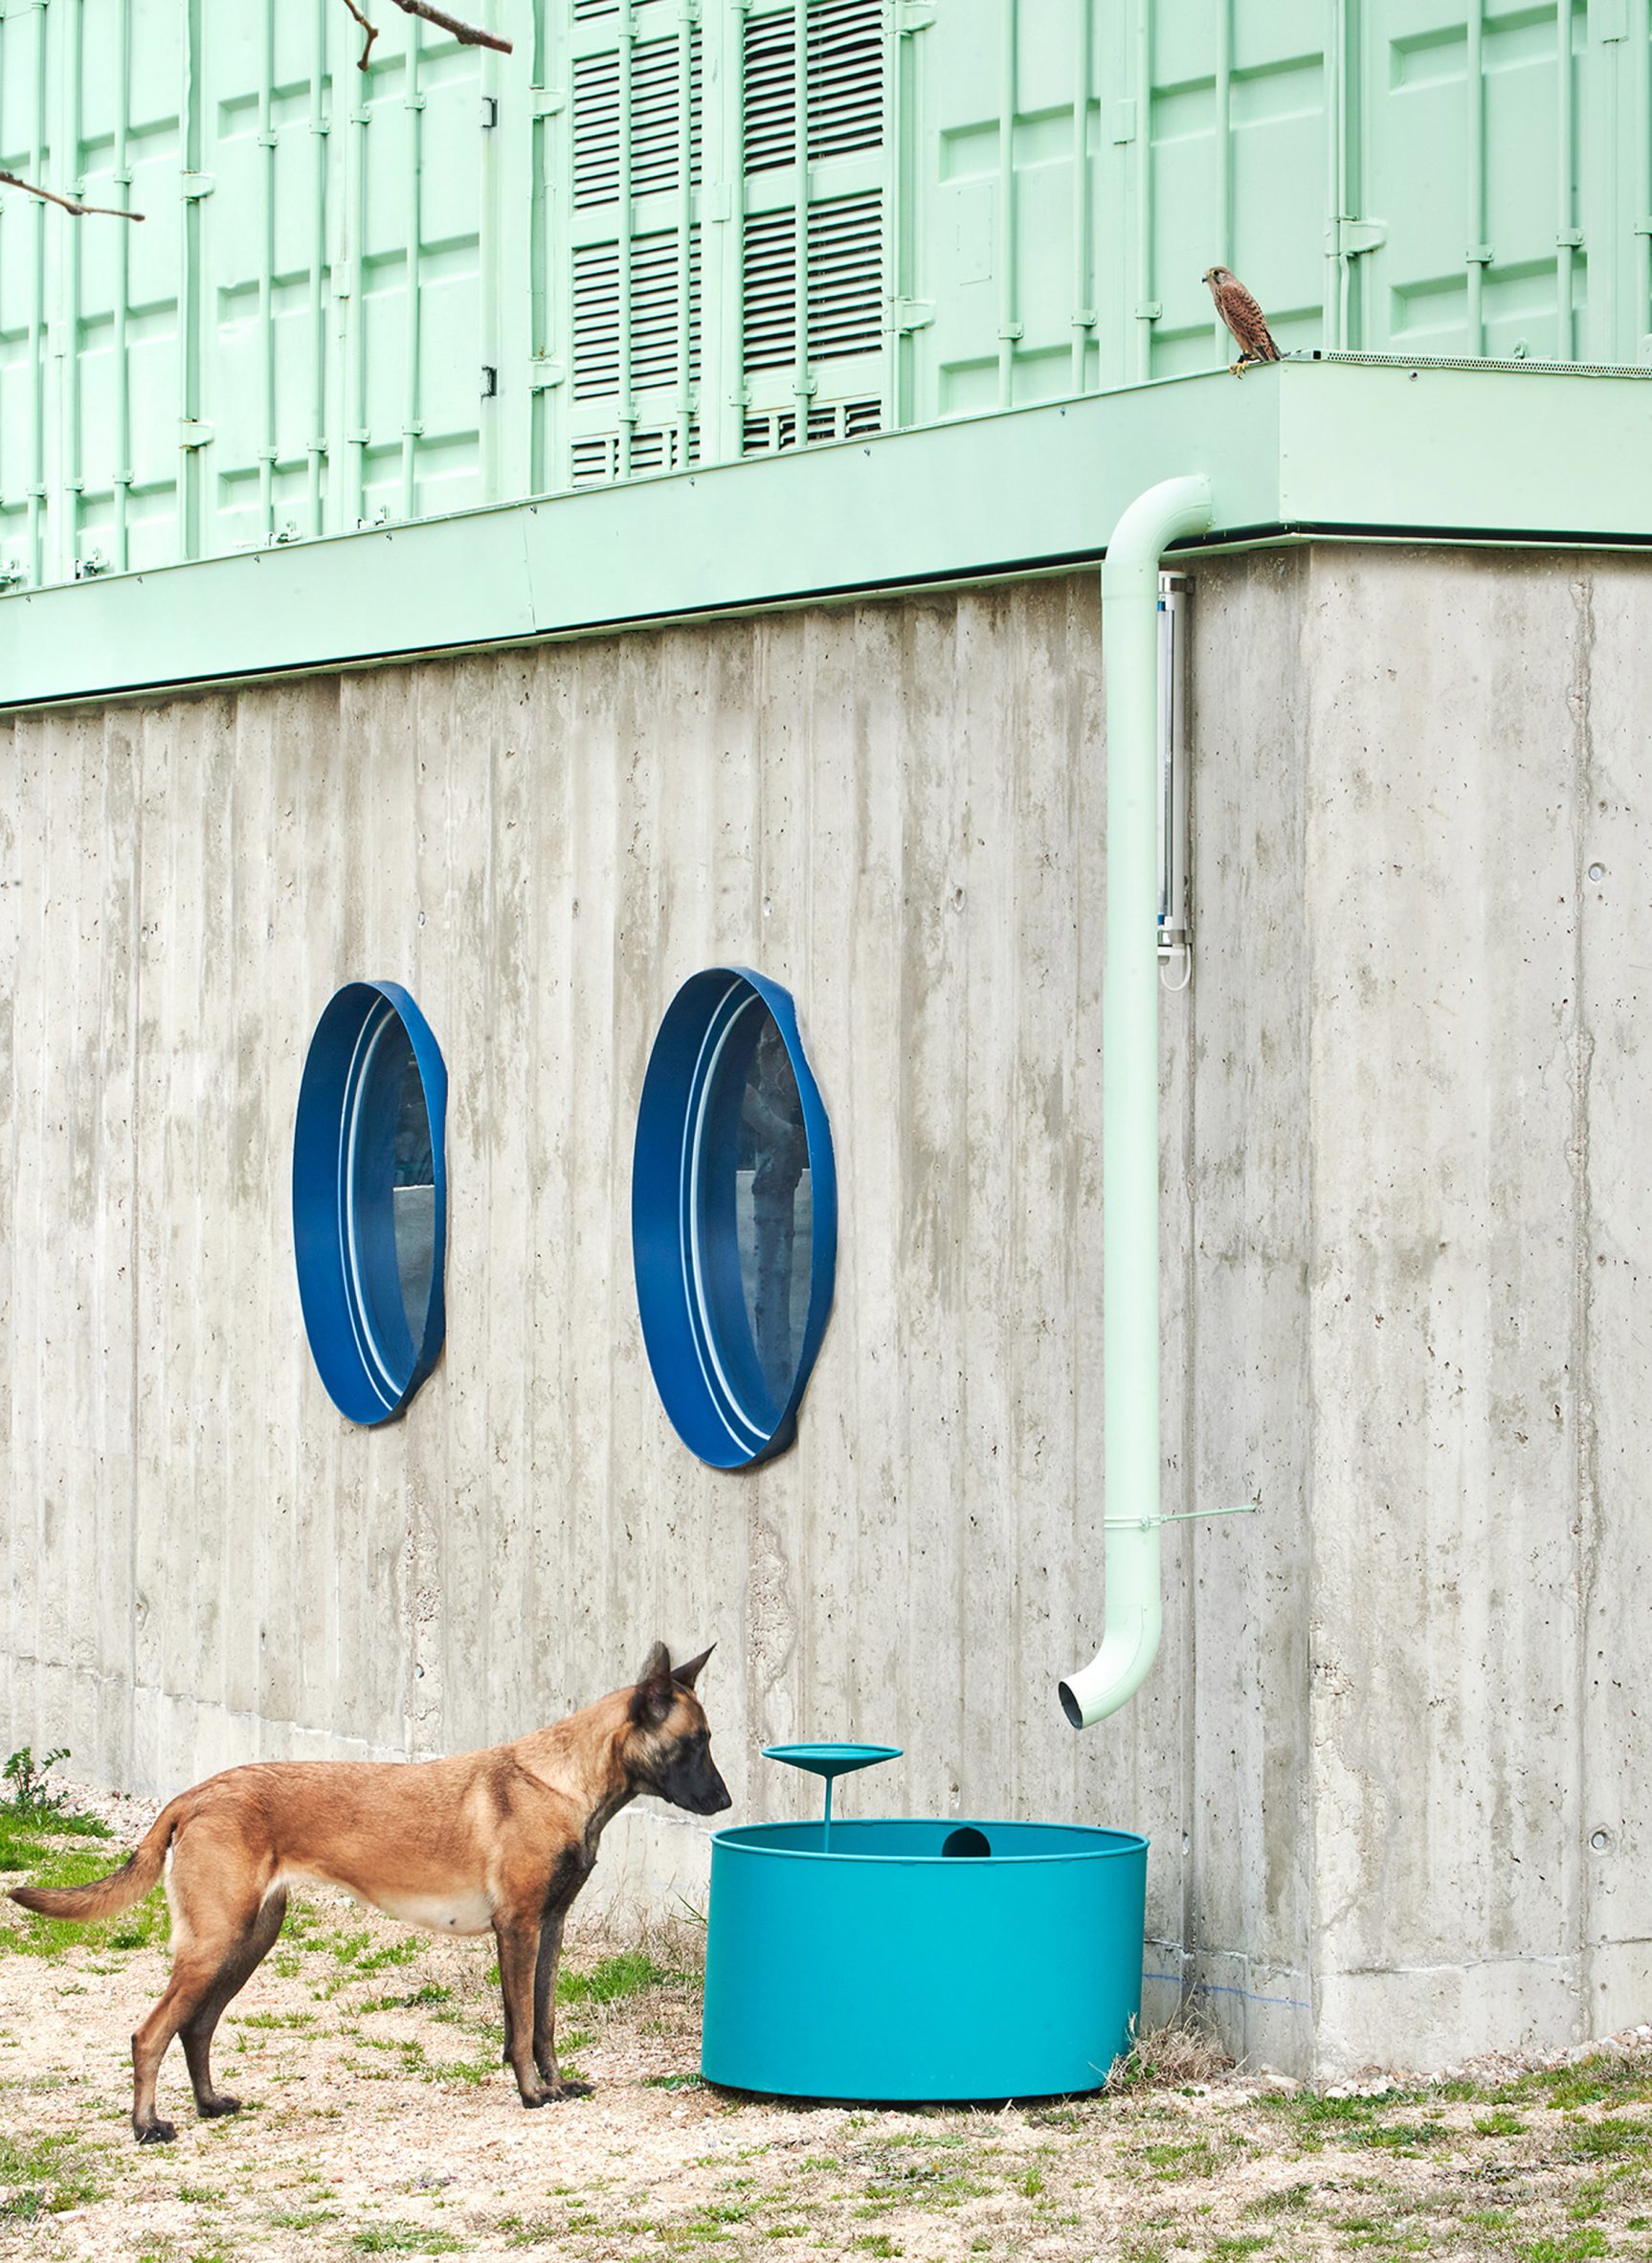 Water trough at Educan school for dogs, humans and other species